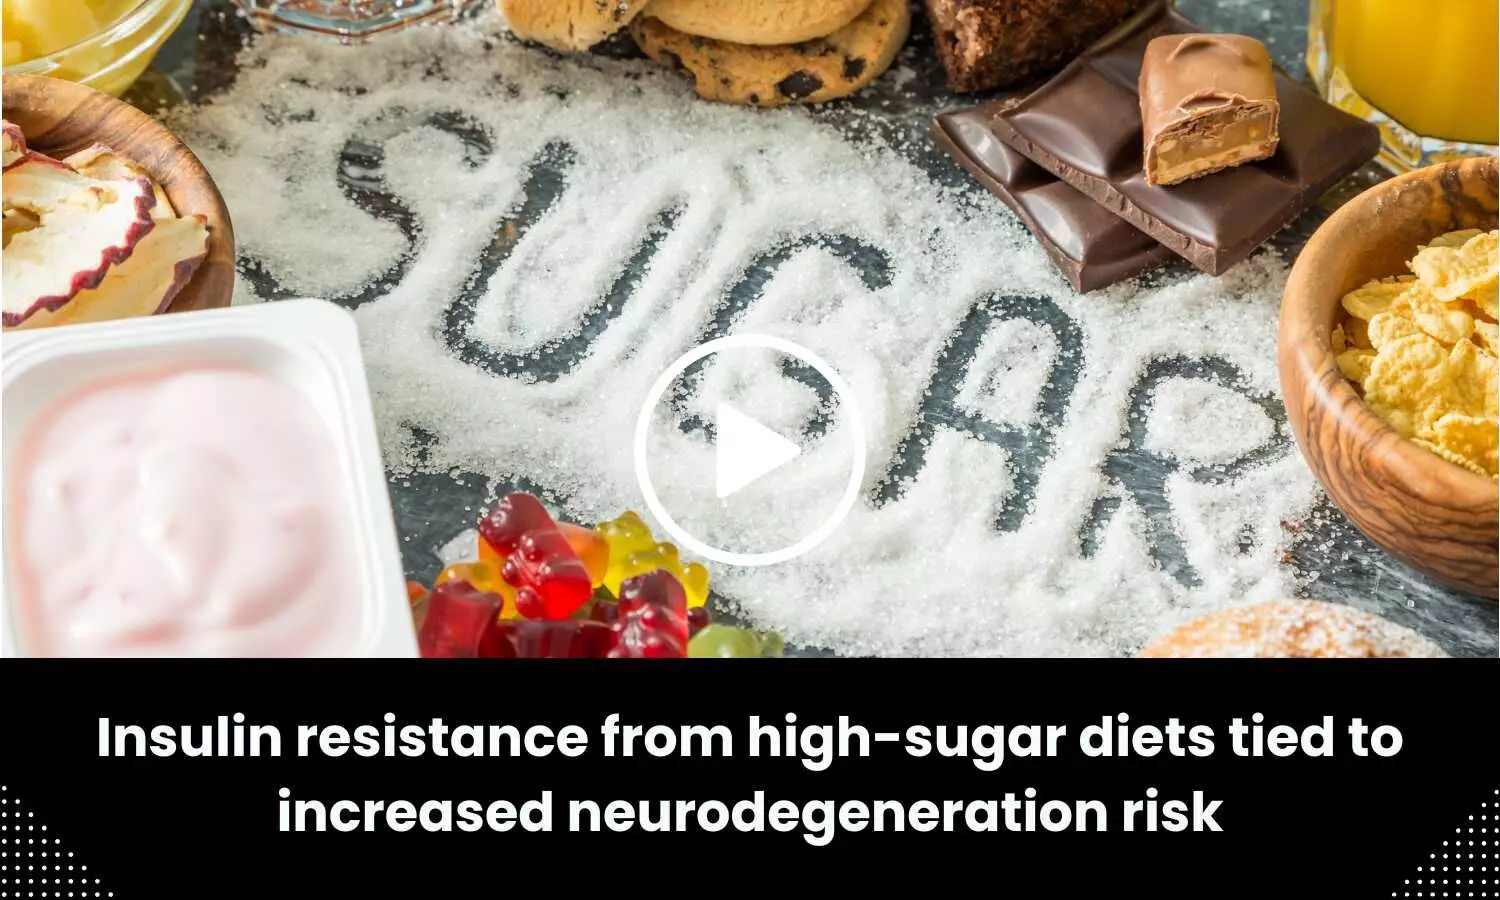 Insulin resistance from high-sugar diets tied to increased neurodegeneration risk